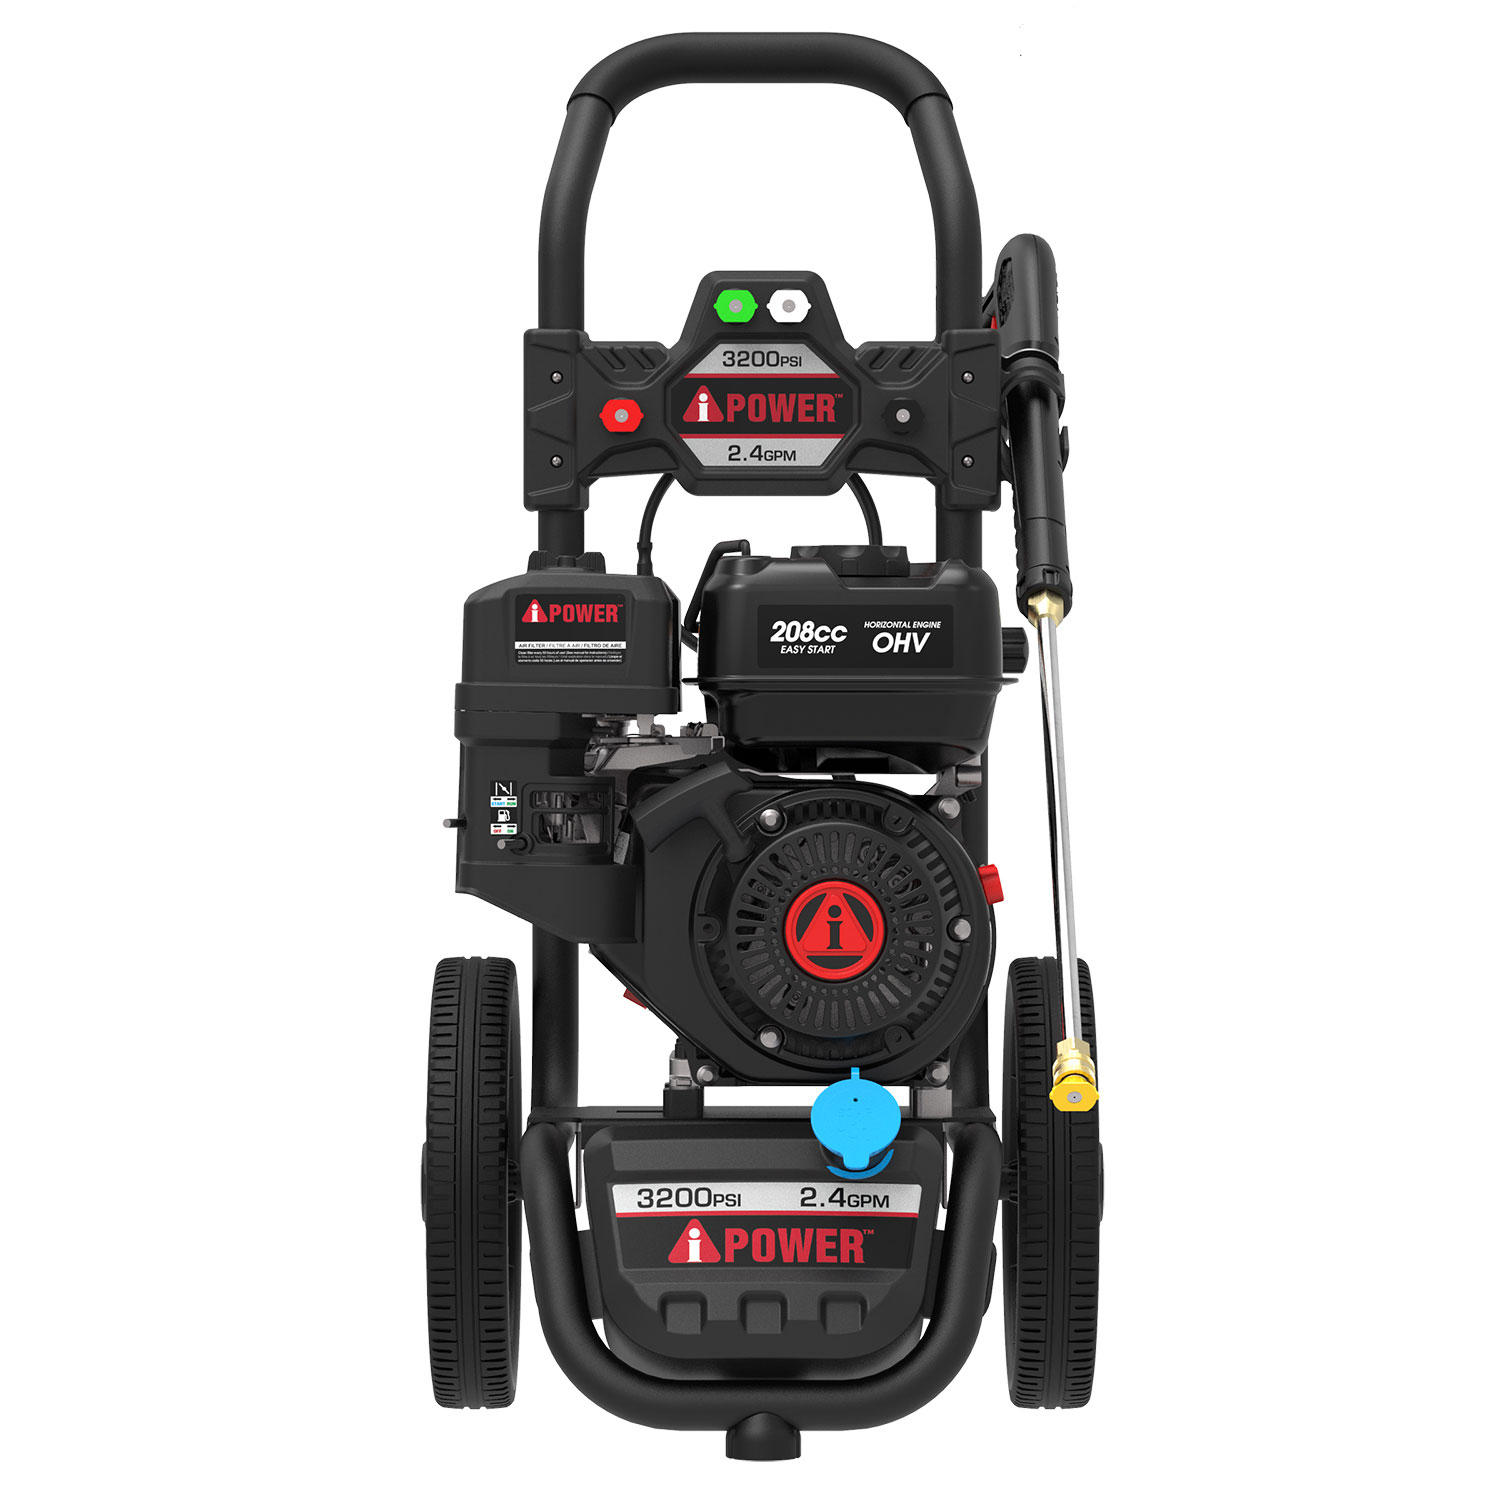 A-iPower 3200PSI Gas Pressure Washer with 2.4 GPM and 196 OHV Kohler Engine